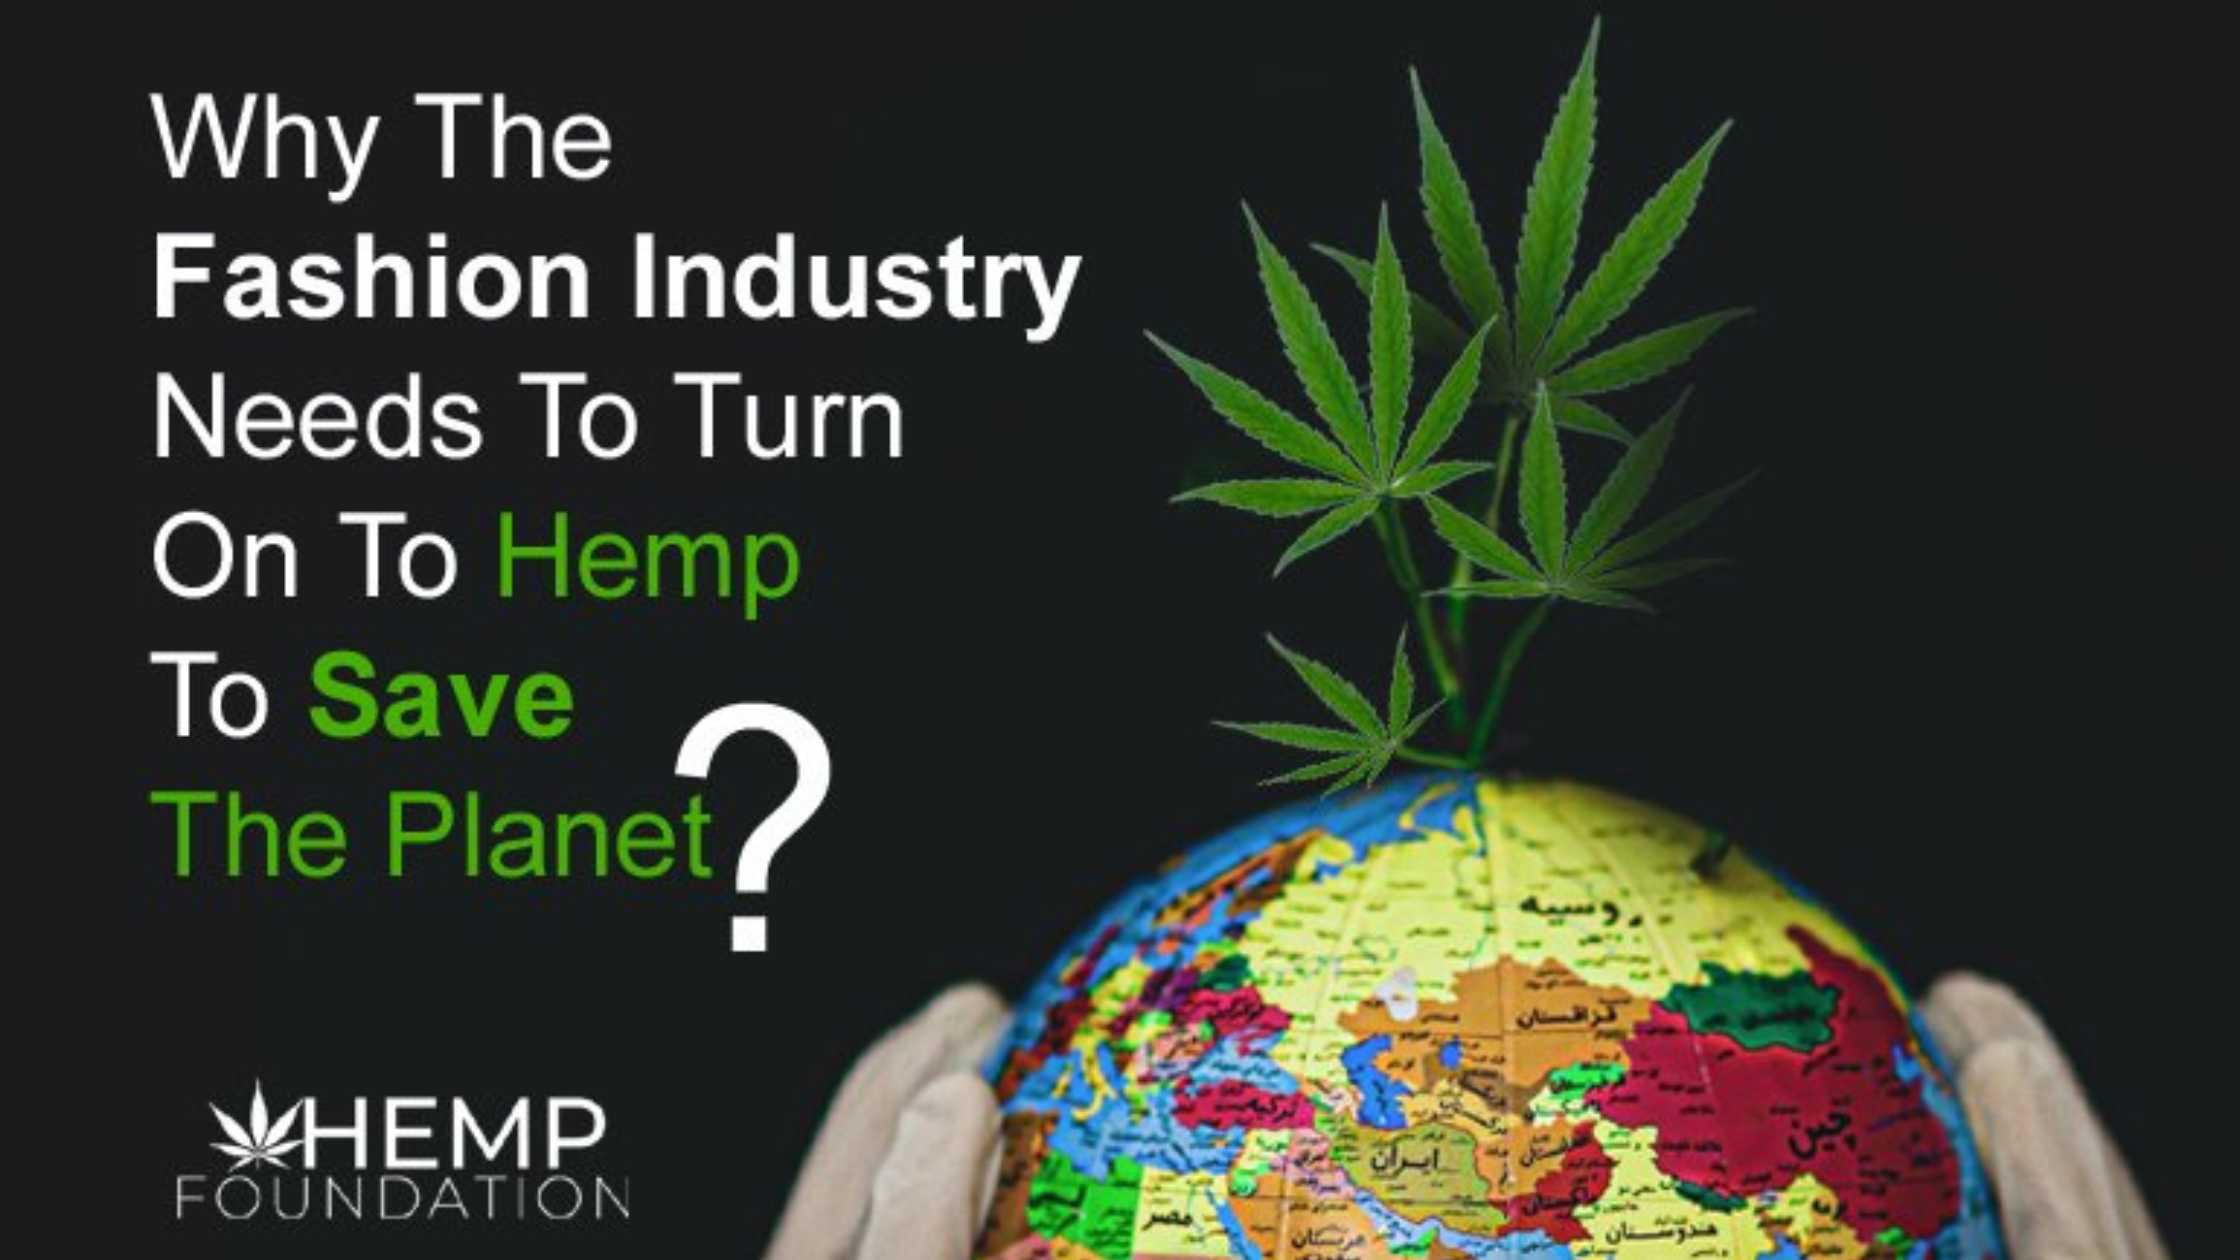 Why does the fashion industry need to turn on hemp?